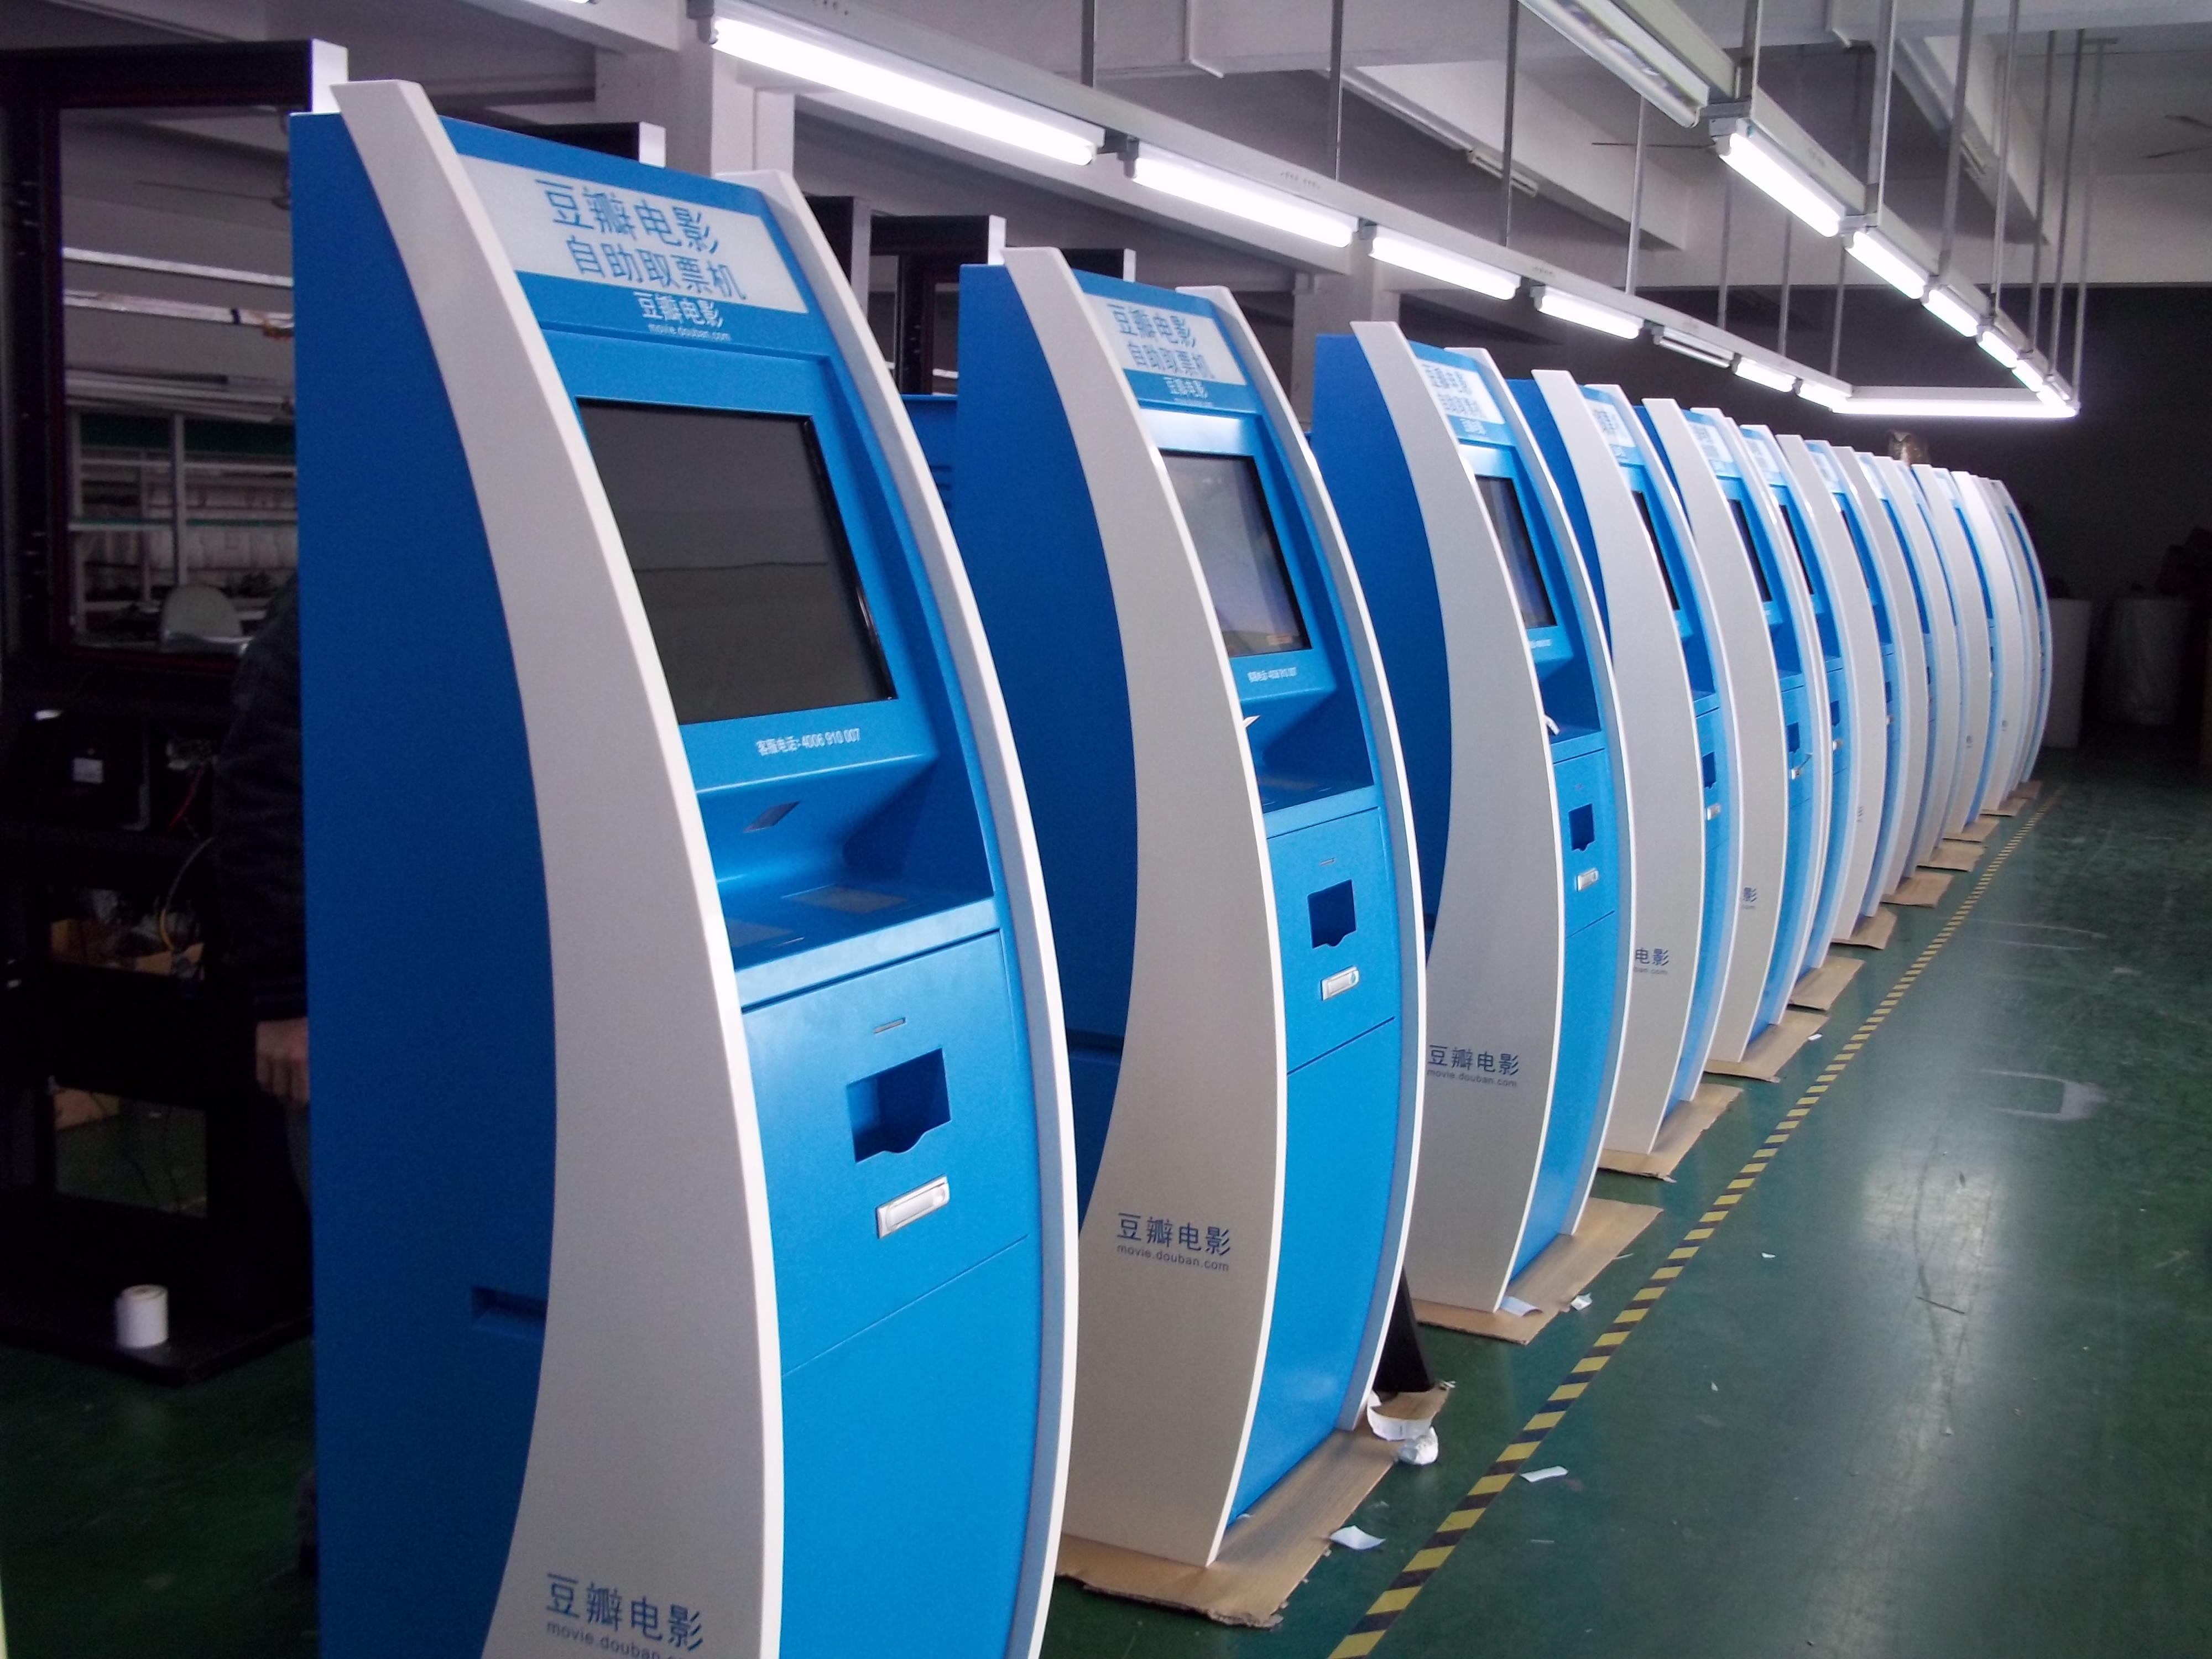 self service payment kiosk with ATM ,bill,printing photo booth,ticket vending machine